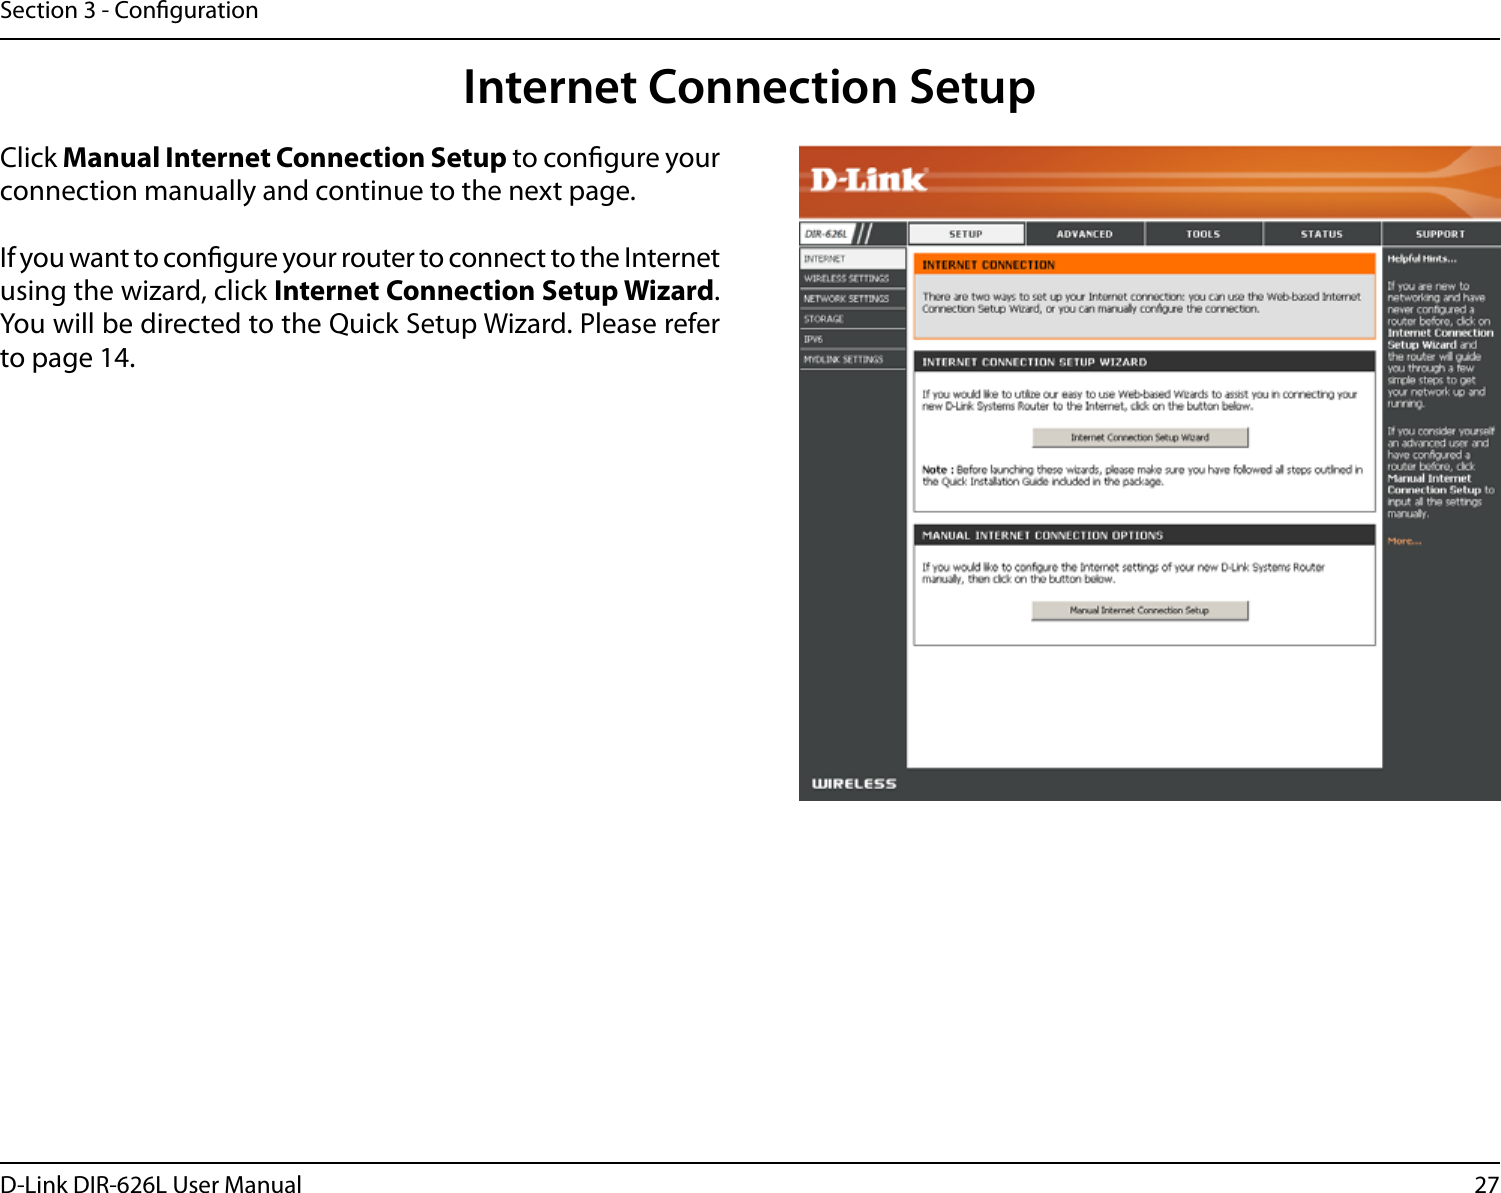 27D-Link DIR-626L User ManualSection 3 - CongurationInternet Connection SetupClick Manual Internet Connection Setup to congure your connection manually and continue to the next page.If you want to congure your router to connect to the Internet using the wizard, click Internet Connection Setup Wizard. You will be directed to the Quick Setup Wizard. Please refer to page 14.